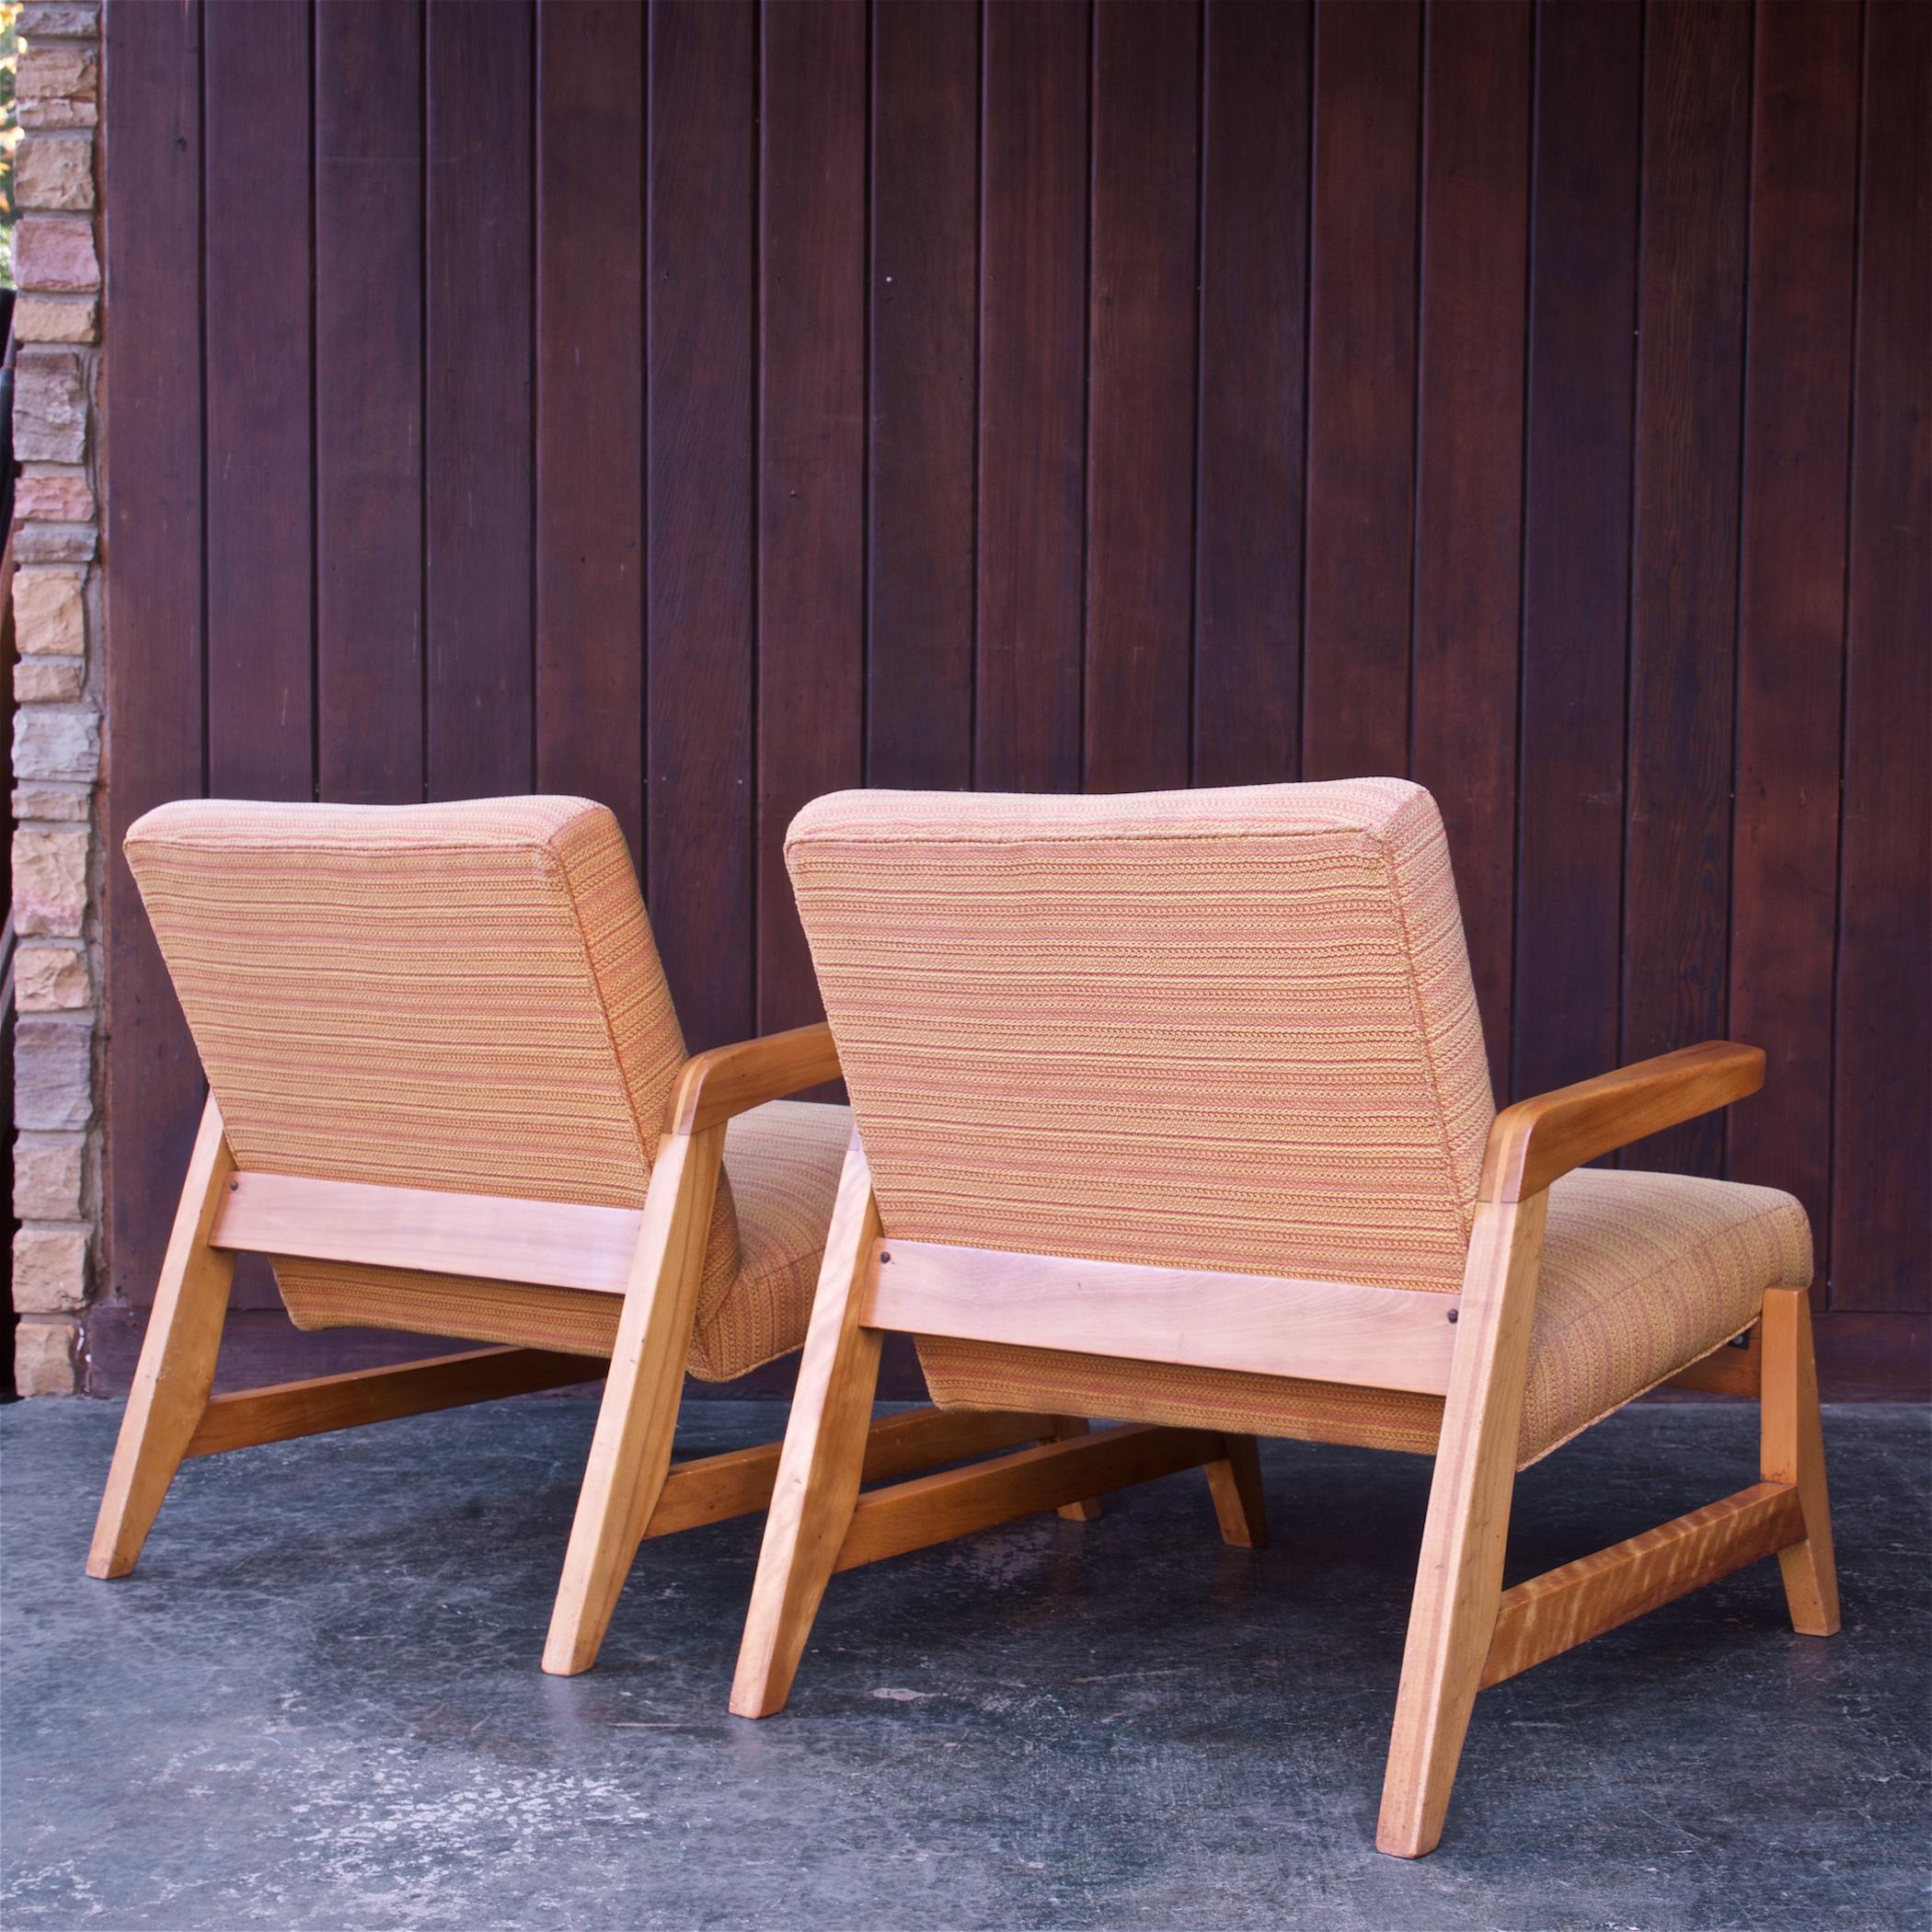 Pair Mid-Century Greenbelt Lounge Chairs by Ralph Rapson for Knoll 1940s Modern In Fair Condition For Sale In Hyattsville, MD